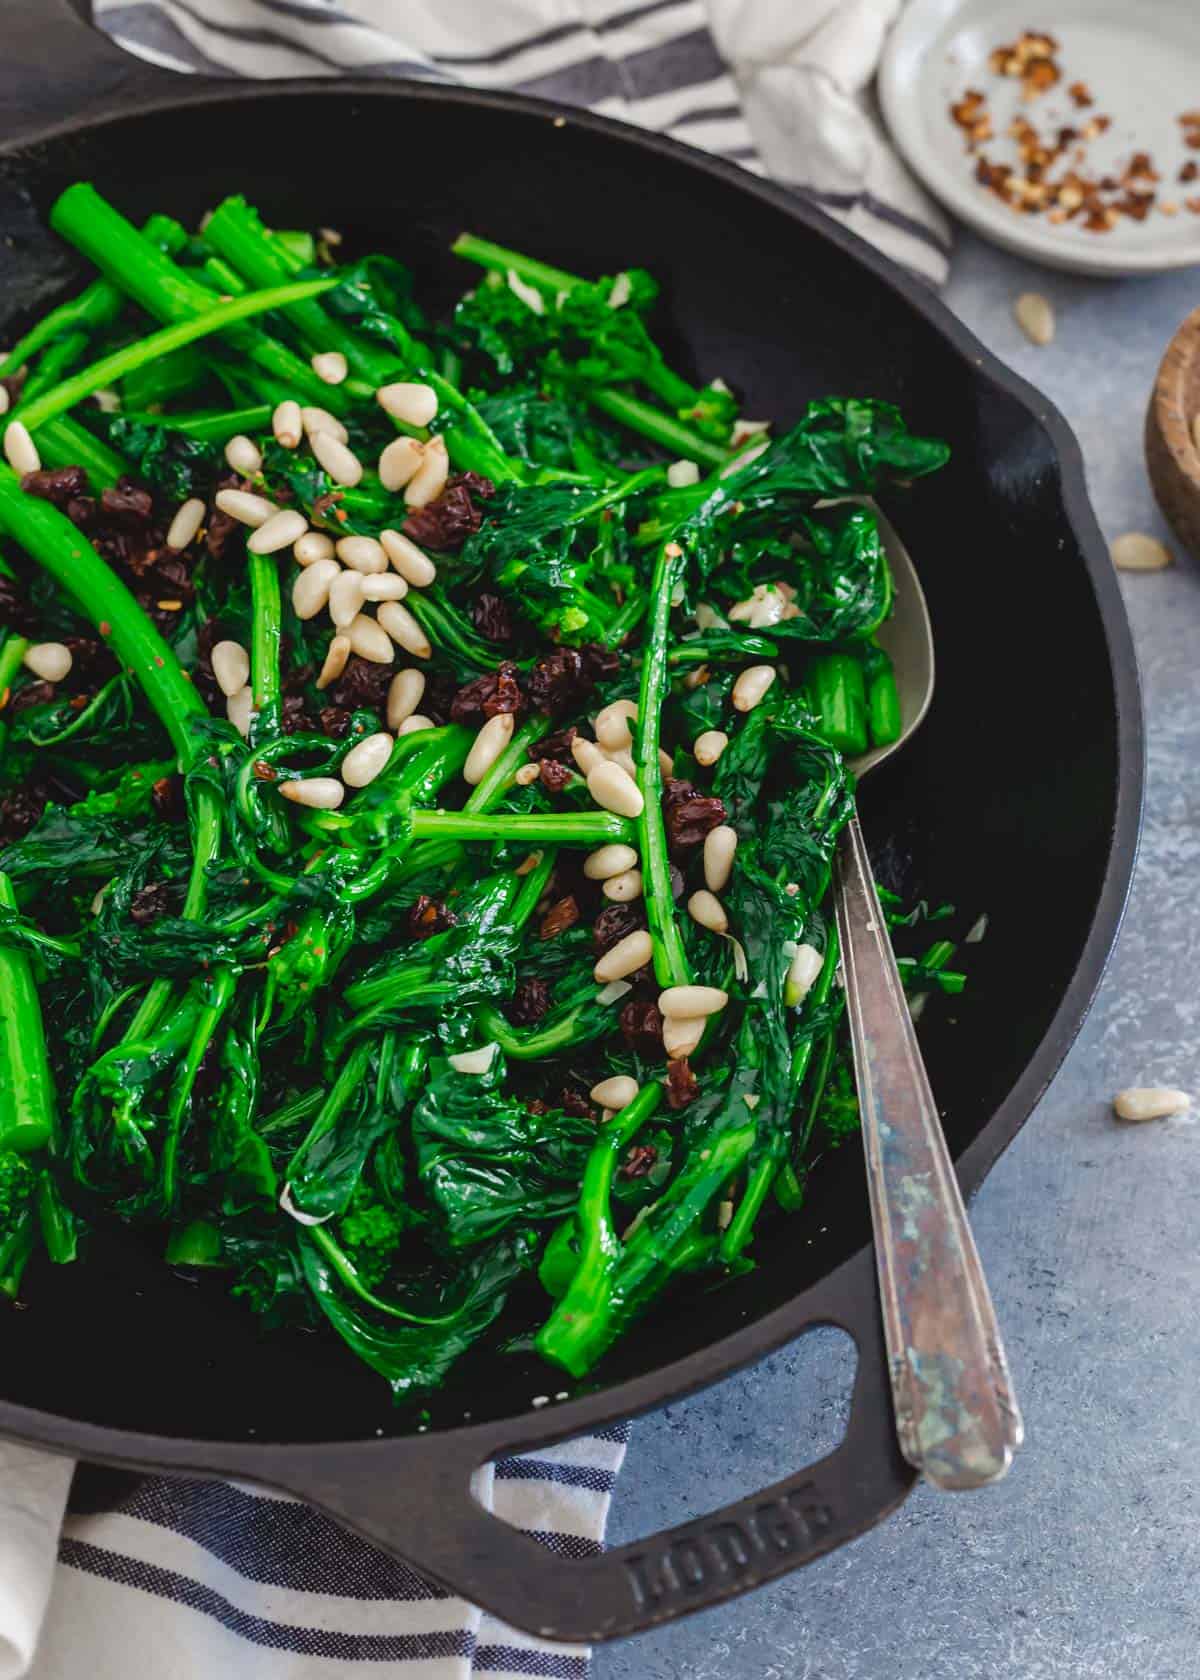 Broccoli rabe sautéed with garlic, red pepper flakes and olive oil in a skillet with a metal spoon.